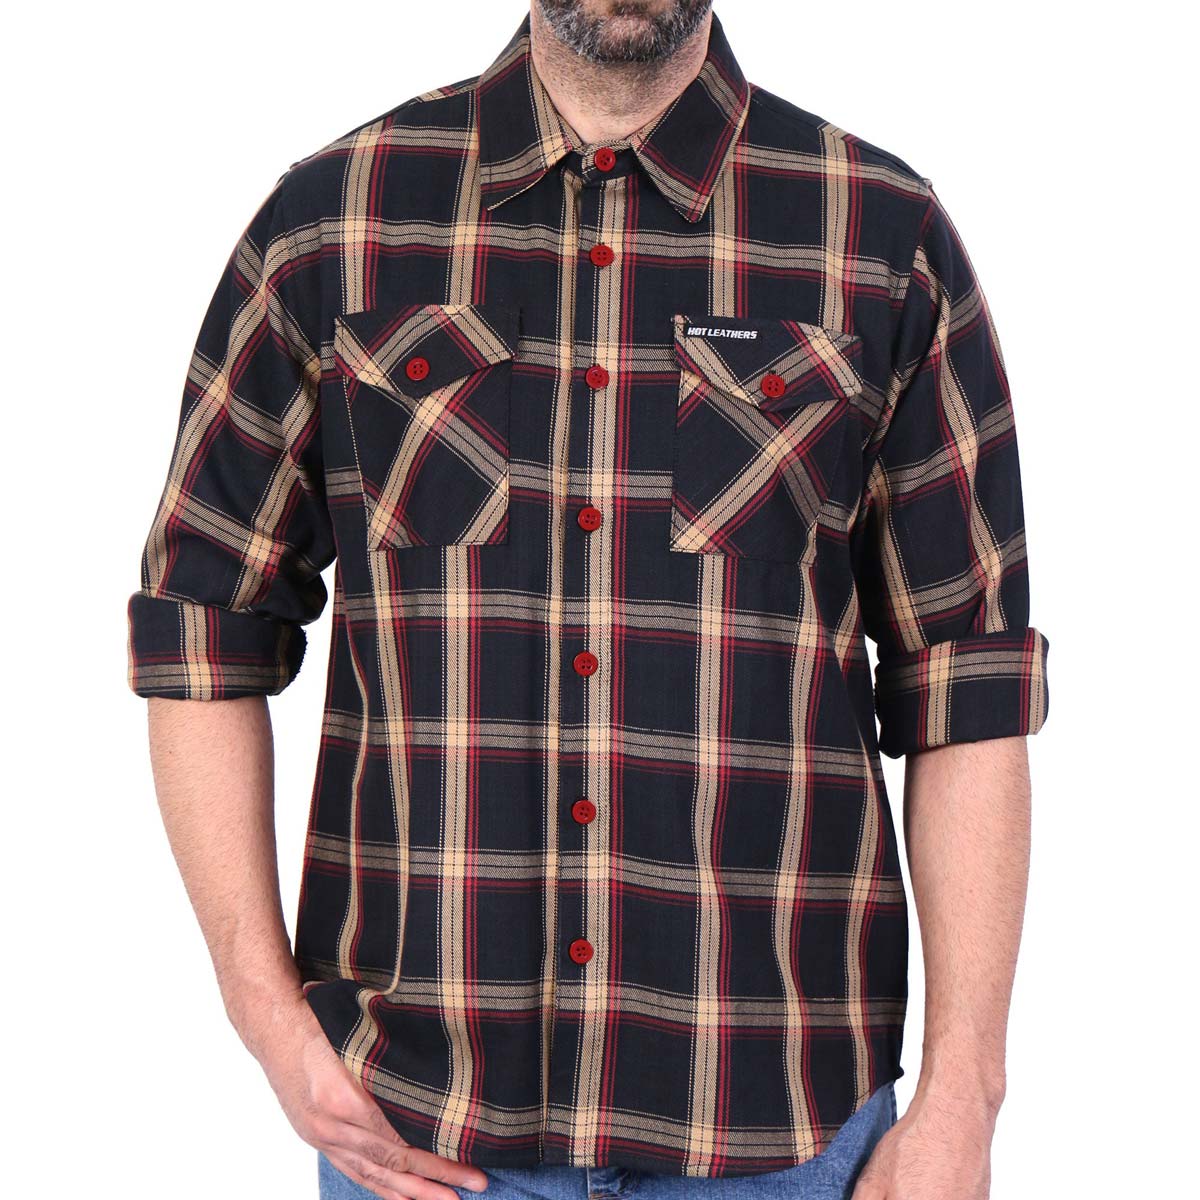 Hot Leathers FLM2038 Men's Black Tan and Red Long Sleeve Flannel Shirt